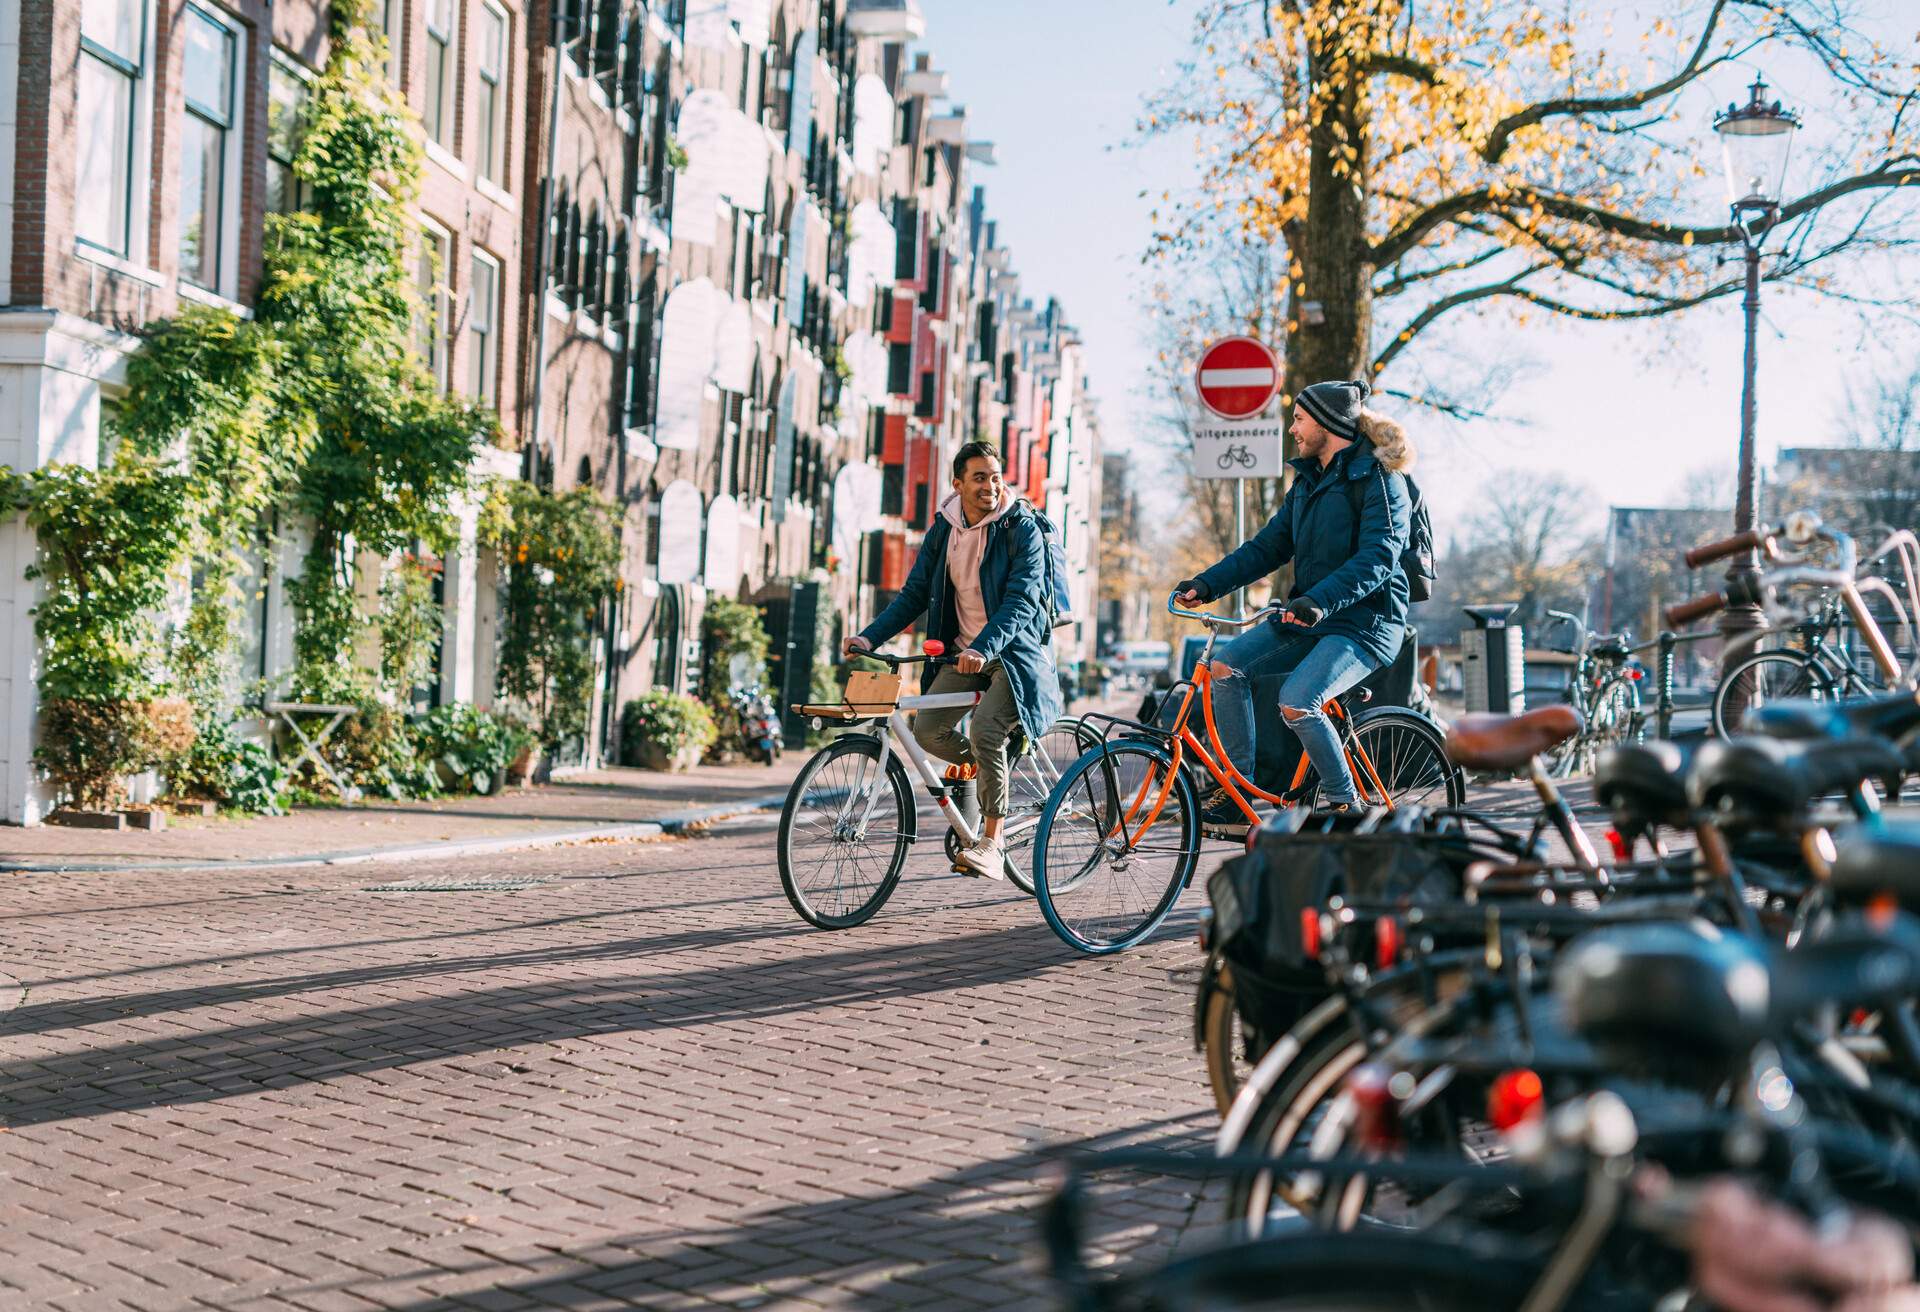 A happy couple relishes their city break as they ride bicycles along a sidewalk, passing by a charming row of buildings and parked bicycles.